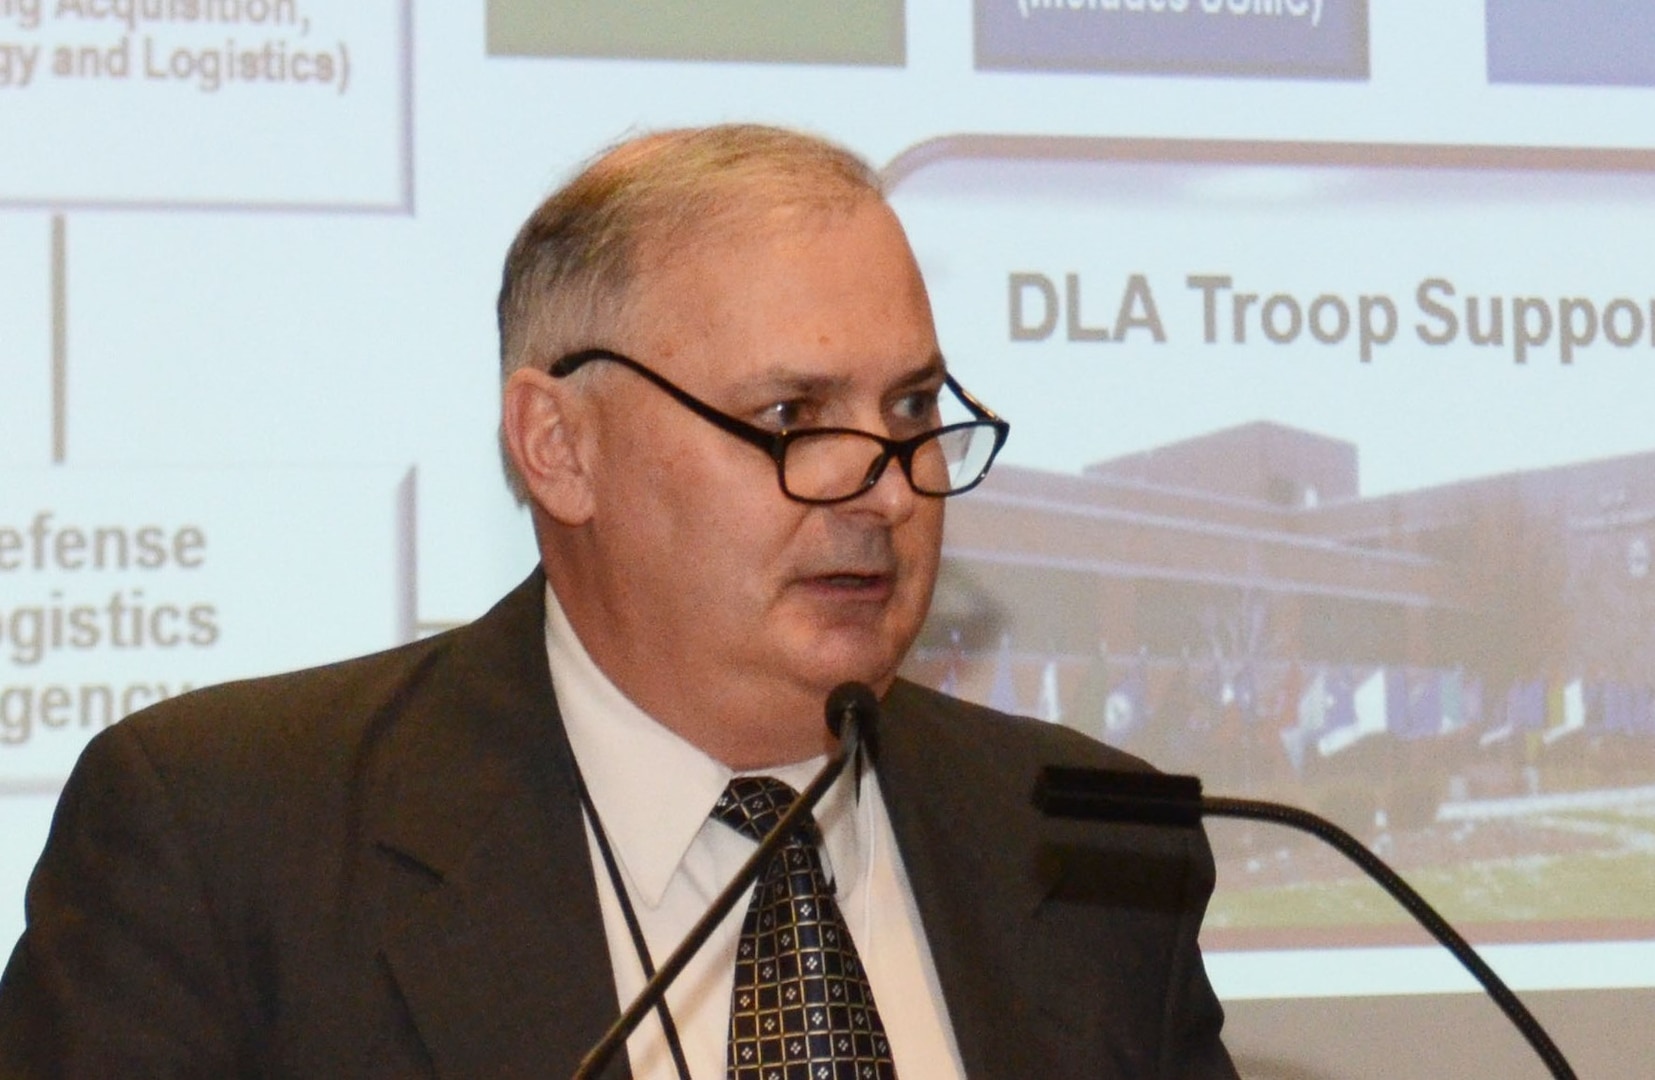 William Kenny, DLA Troop Support executive director of contracting and acquisition management, discusses DLA’s culture improvement efforts at the annual Federal Executive Board Equal Employment Opportunity and Diversity training event in Philadelphia Nov. 23. Kenny is also the recipient of the 2015 Partners in Equality Council Achievement Senior Leadership Award for helping the agency achieve progress in EEO and diversity programs, including recruitment, hiring, promotions, awards and career development opportunities. 